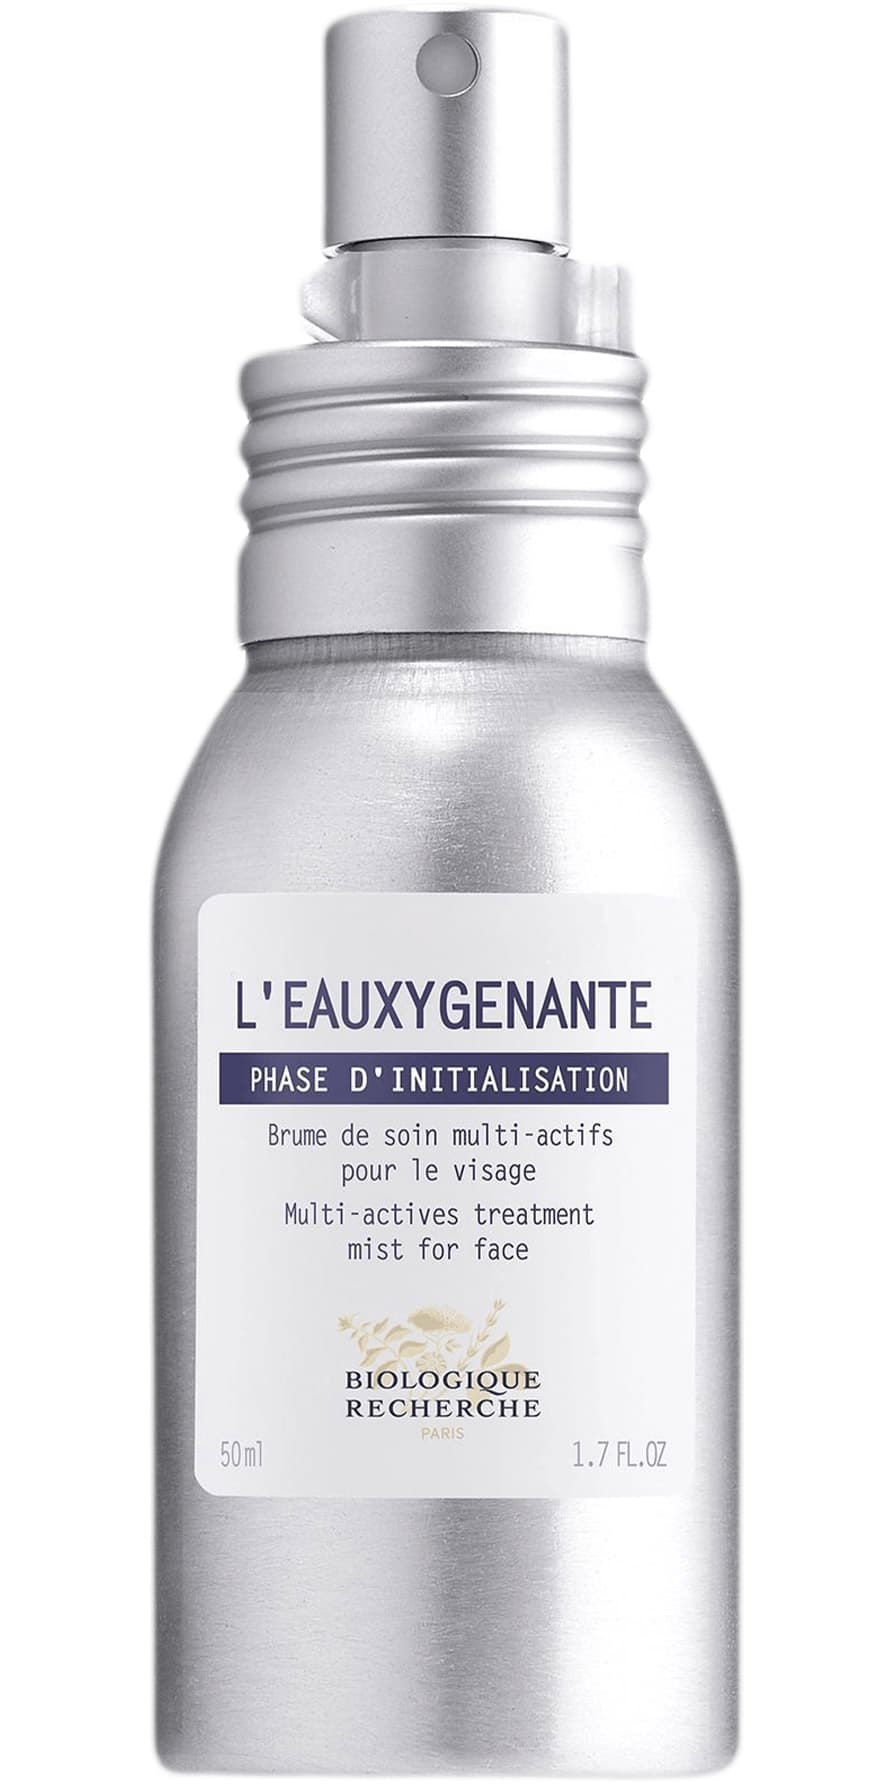 variant-50ml-product-page-image